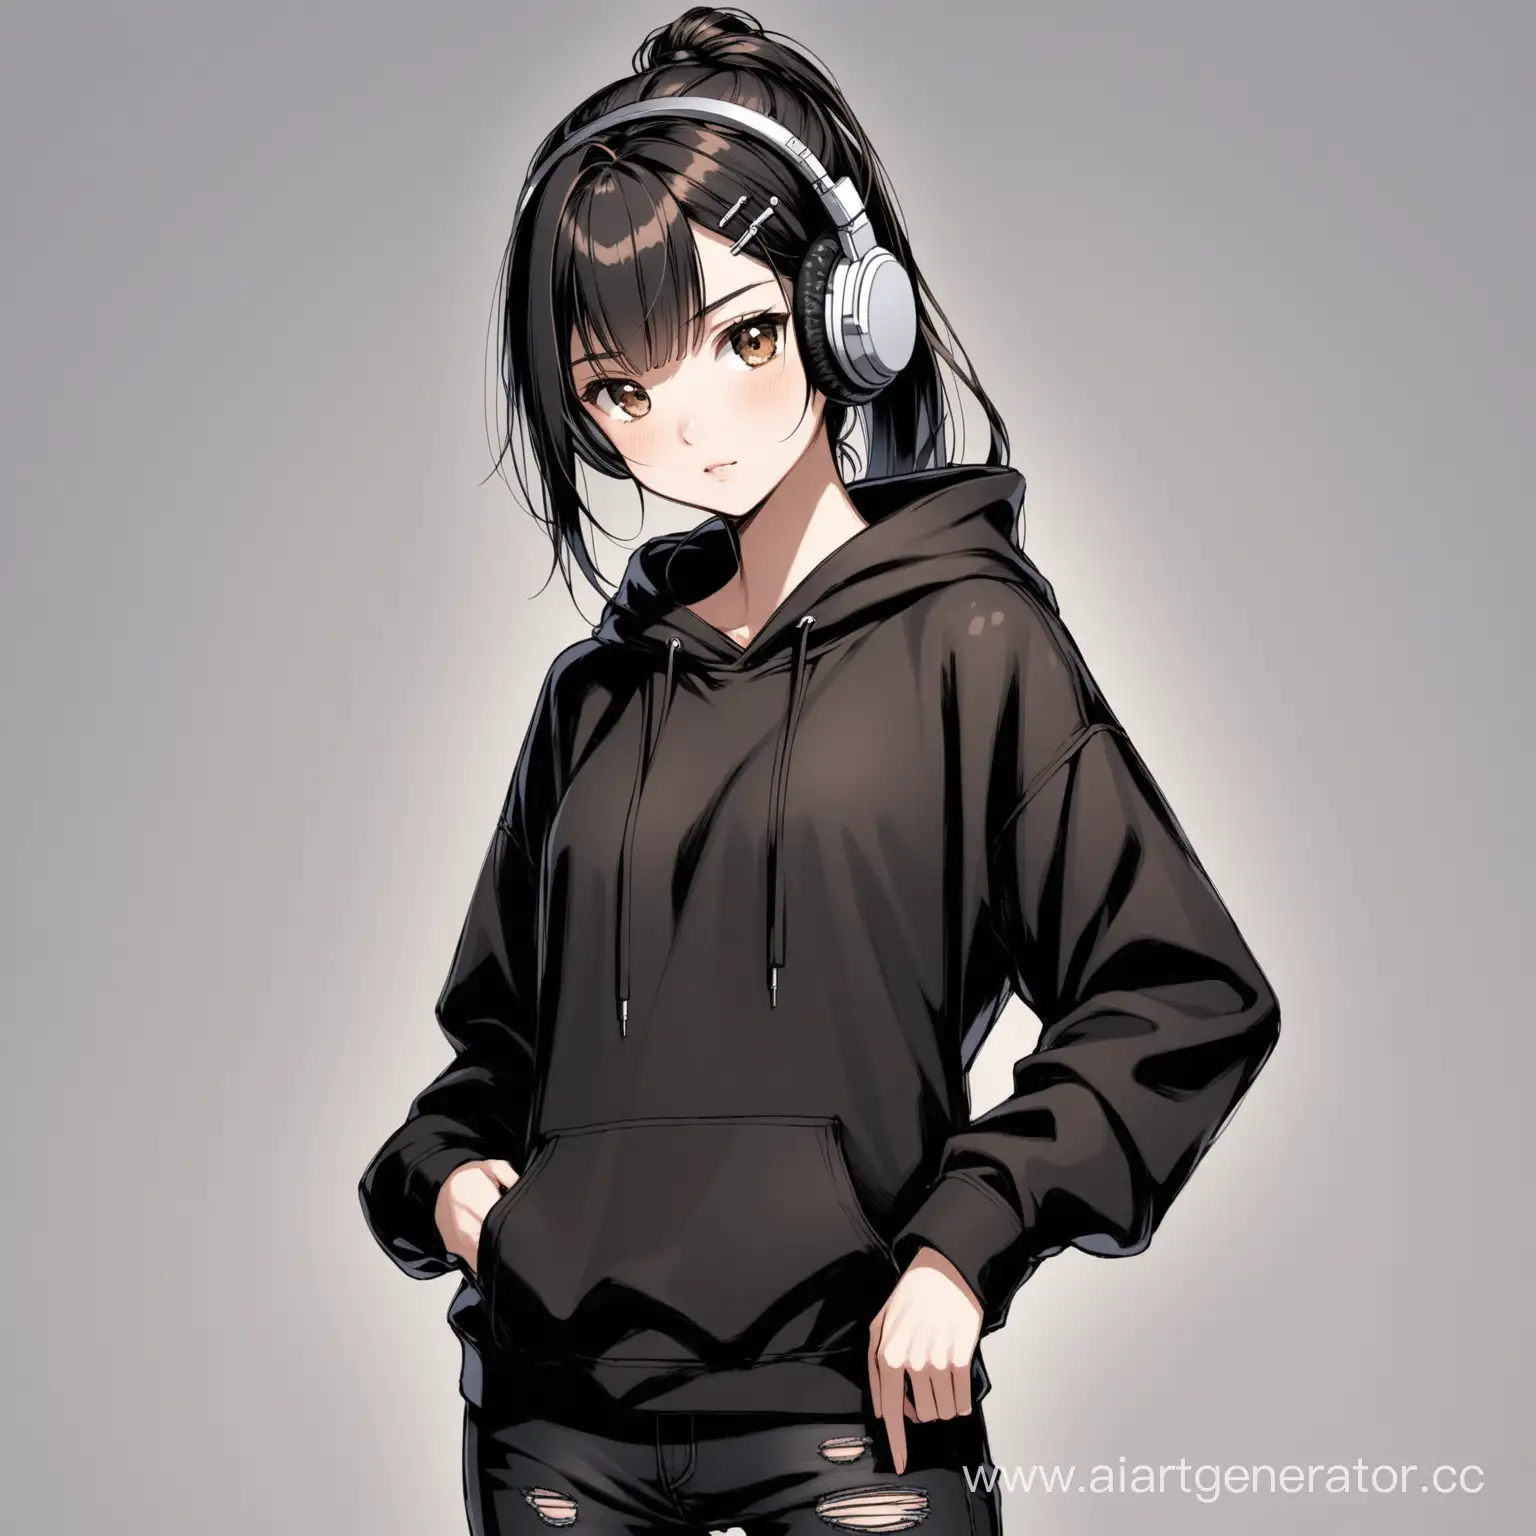 Young-Woman-with-Ponytail-and-Headphones-in-Urban-Attire